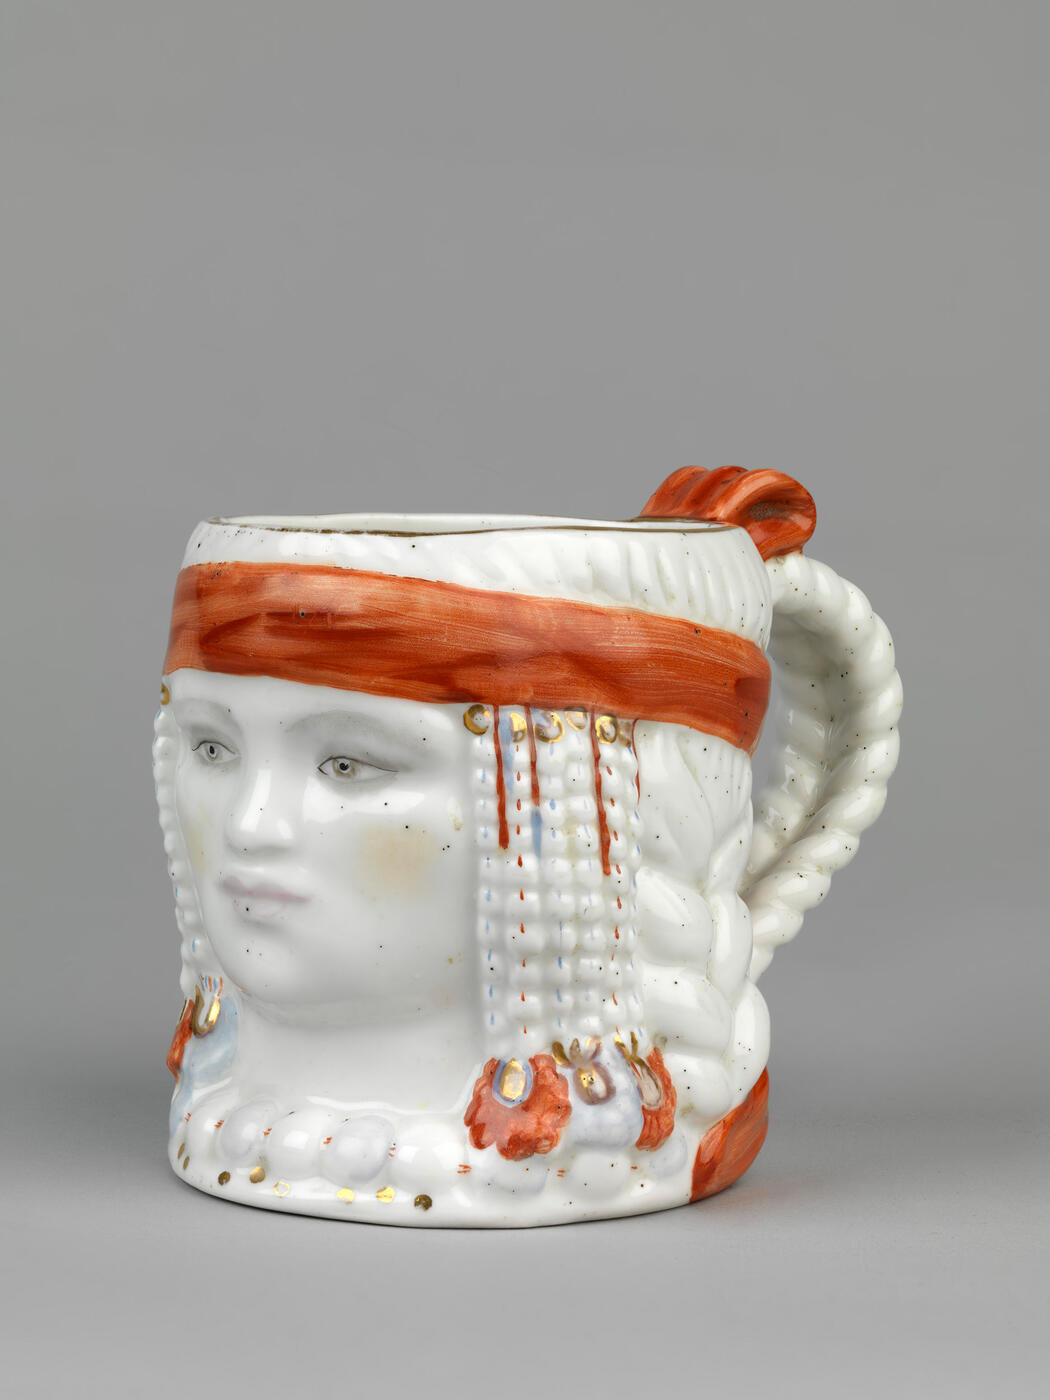 AFTER  A 1918 MODEL BY NATALIA DANKO, STATE PORCELAIN MANUFACTORY, 1920s